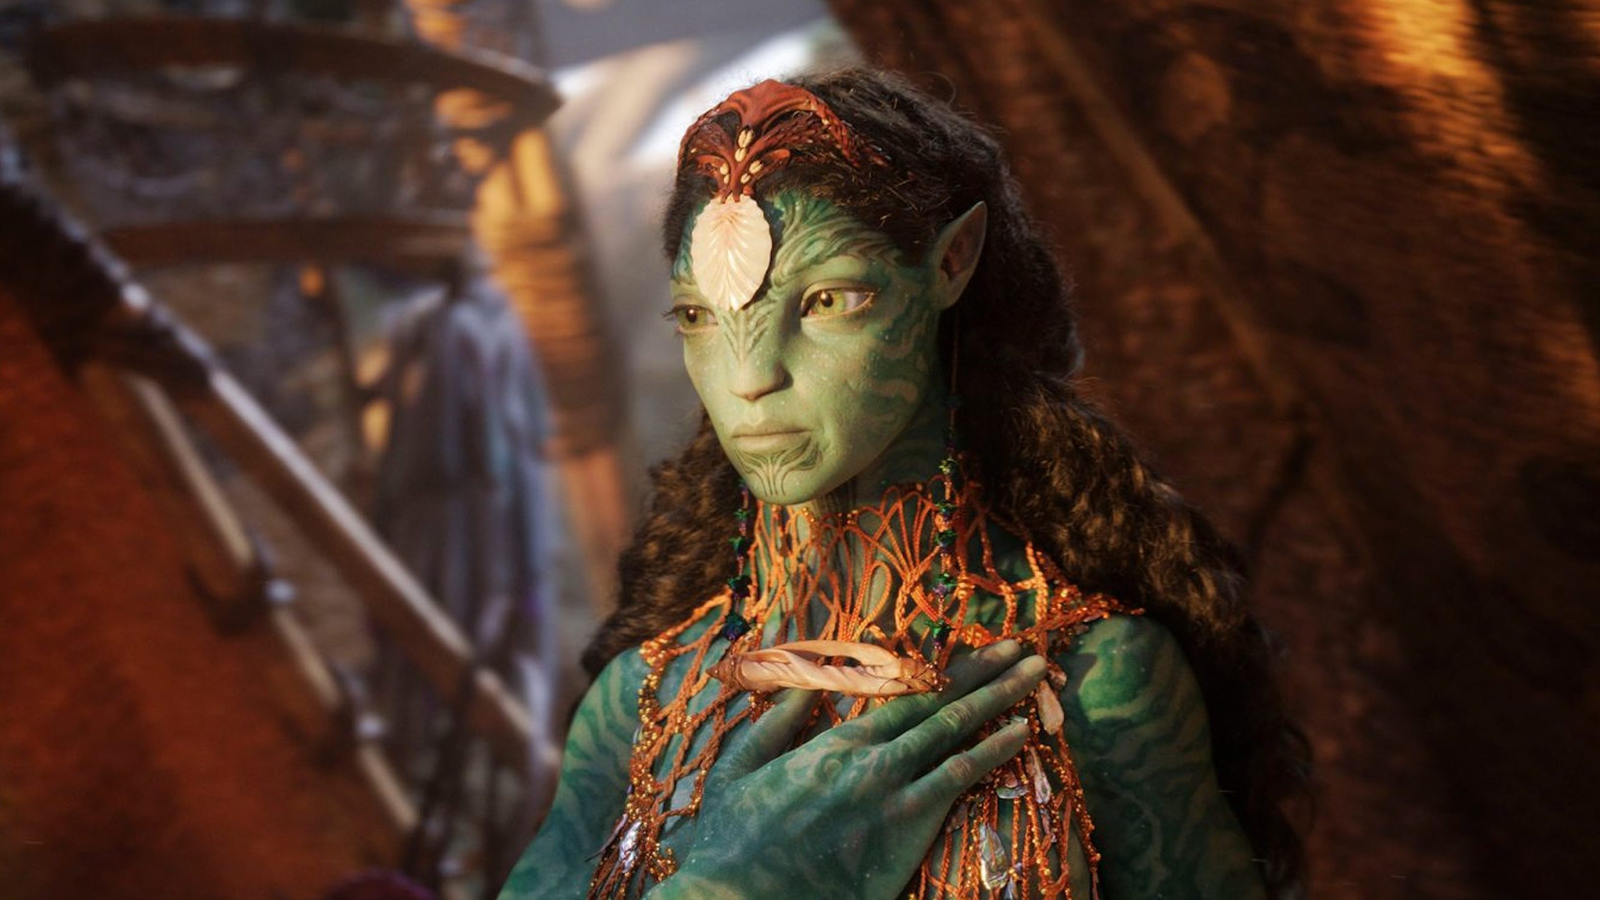 Avatar 2 will need to break sequel records to justify its budget